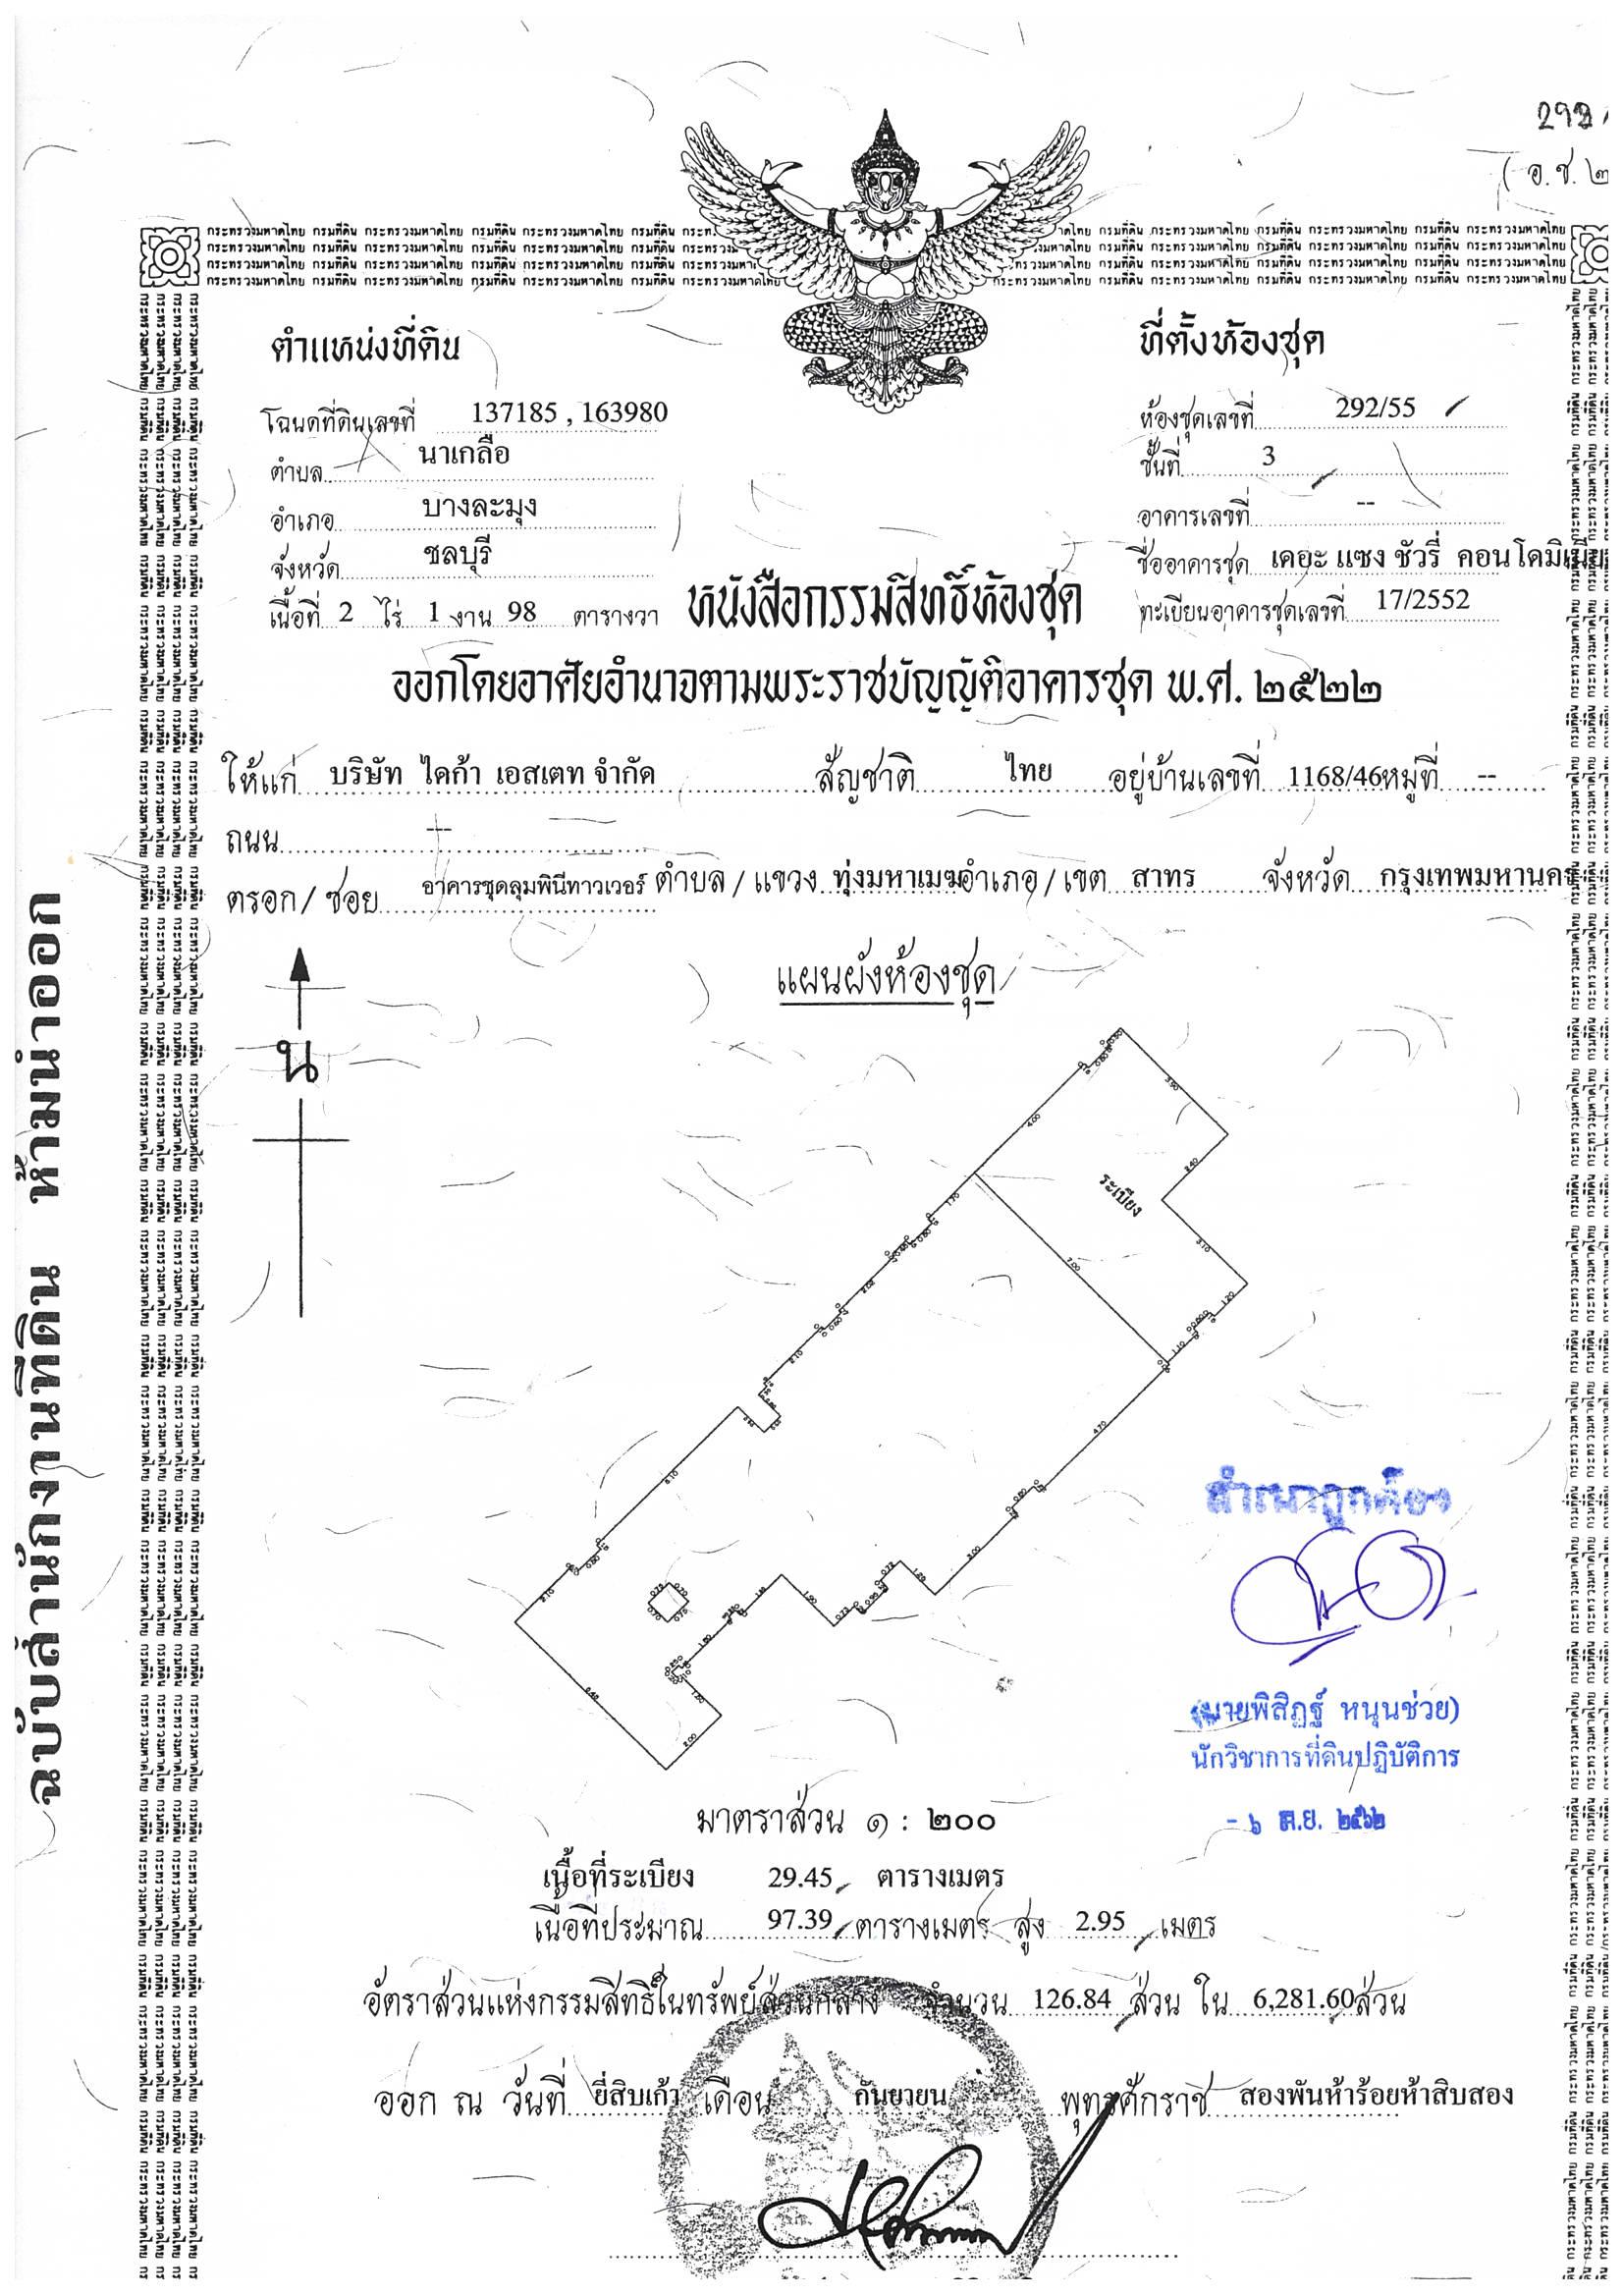 Extract from the Real Estate Register of Thailand